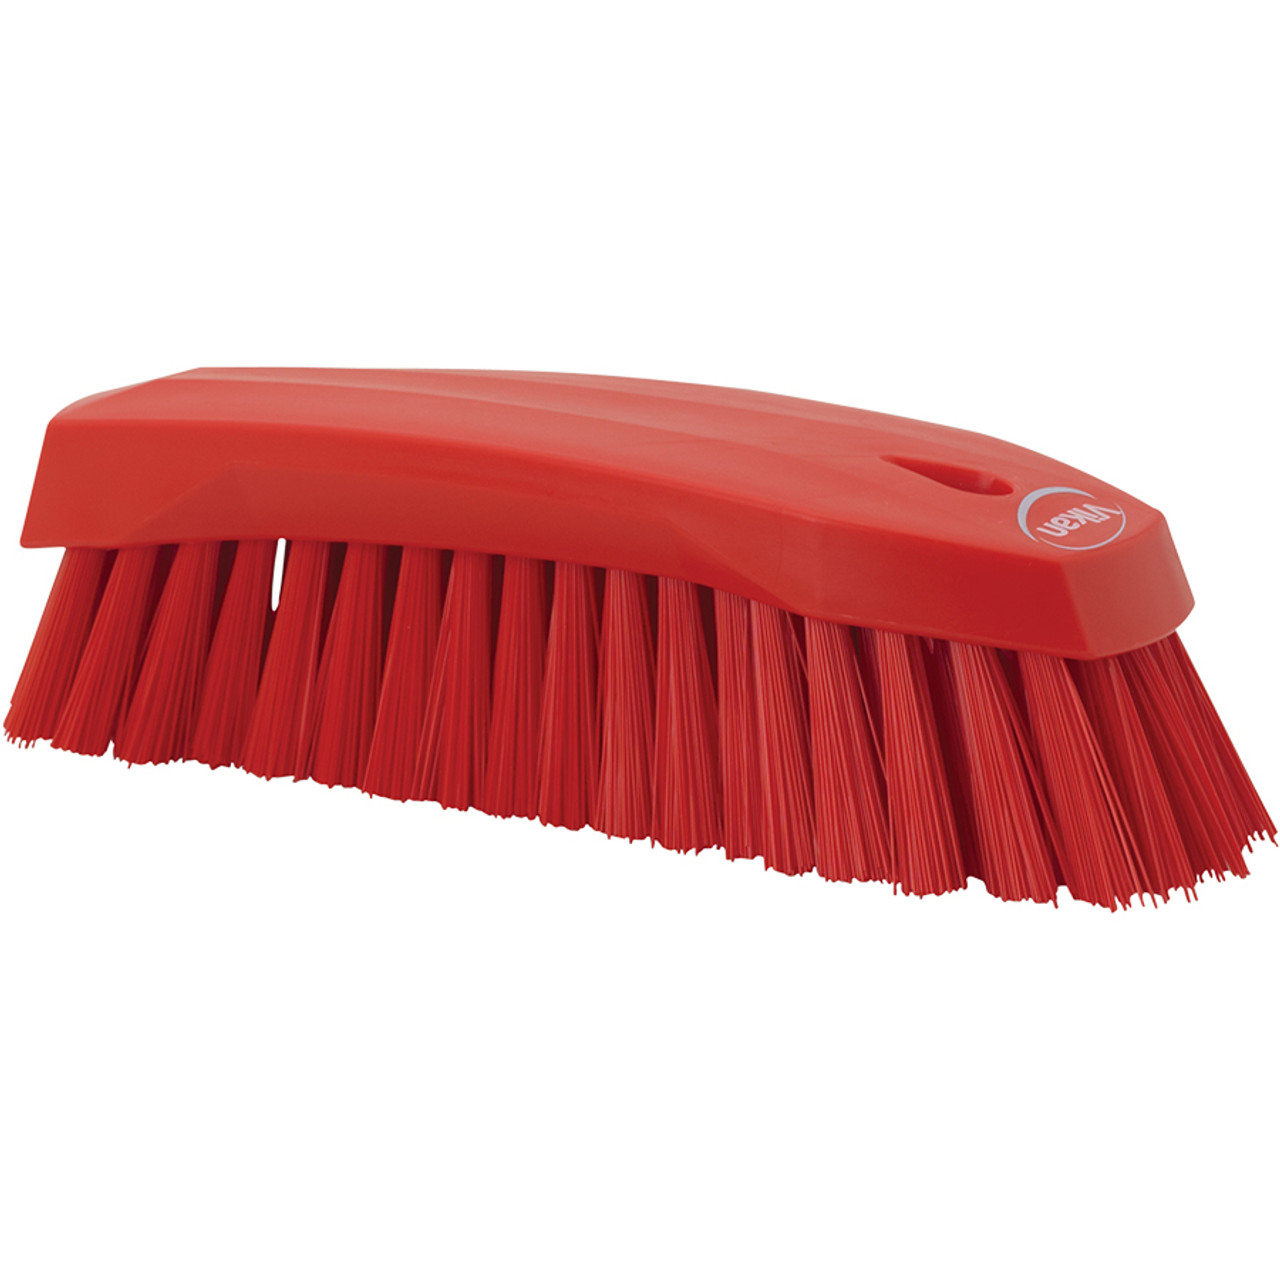 Vikan Ultra-Slim Cleaning Brush with Long Handle, 23.62 Medium, Red, One  size, Multi